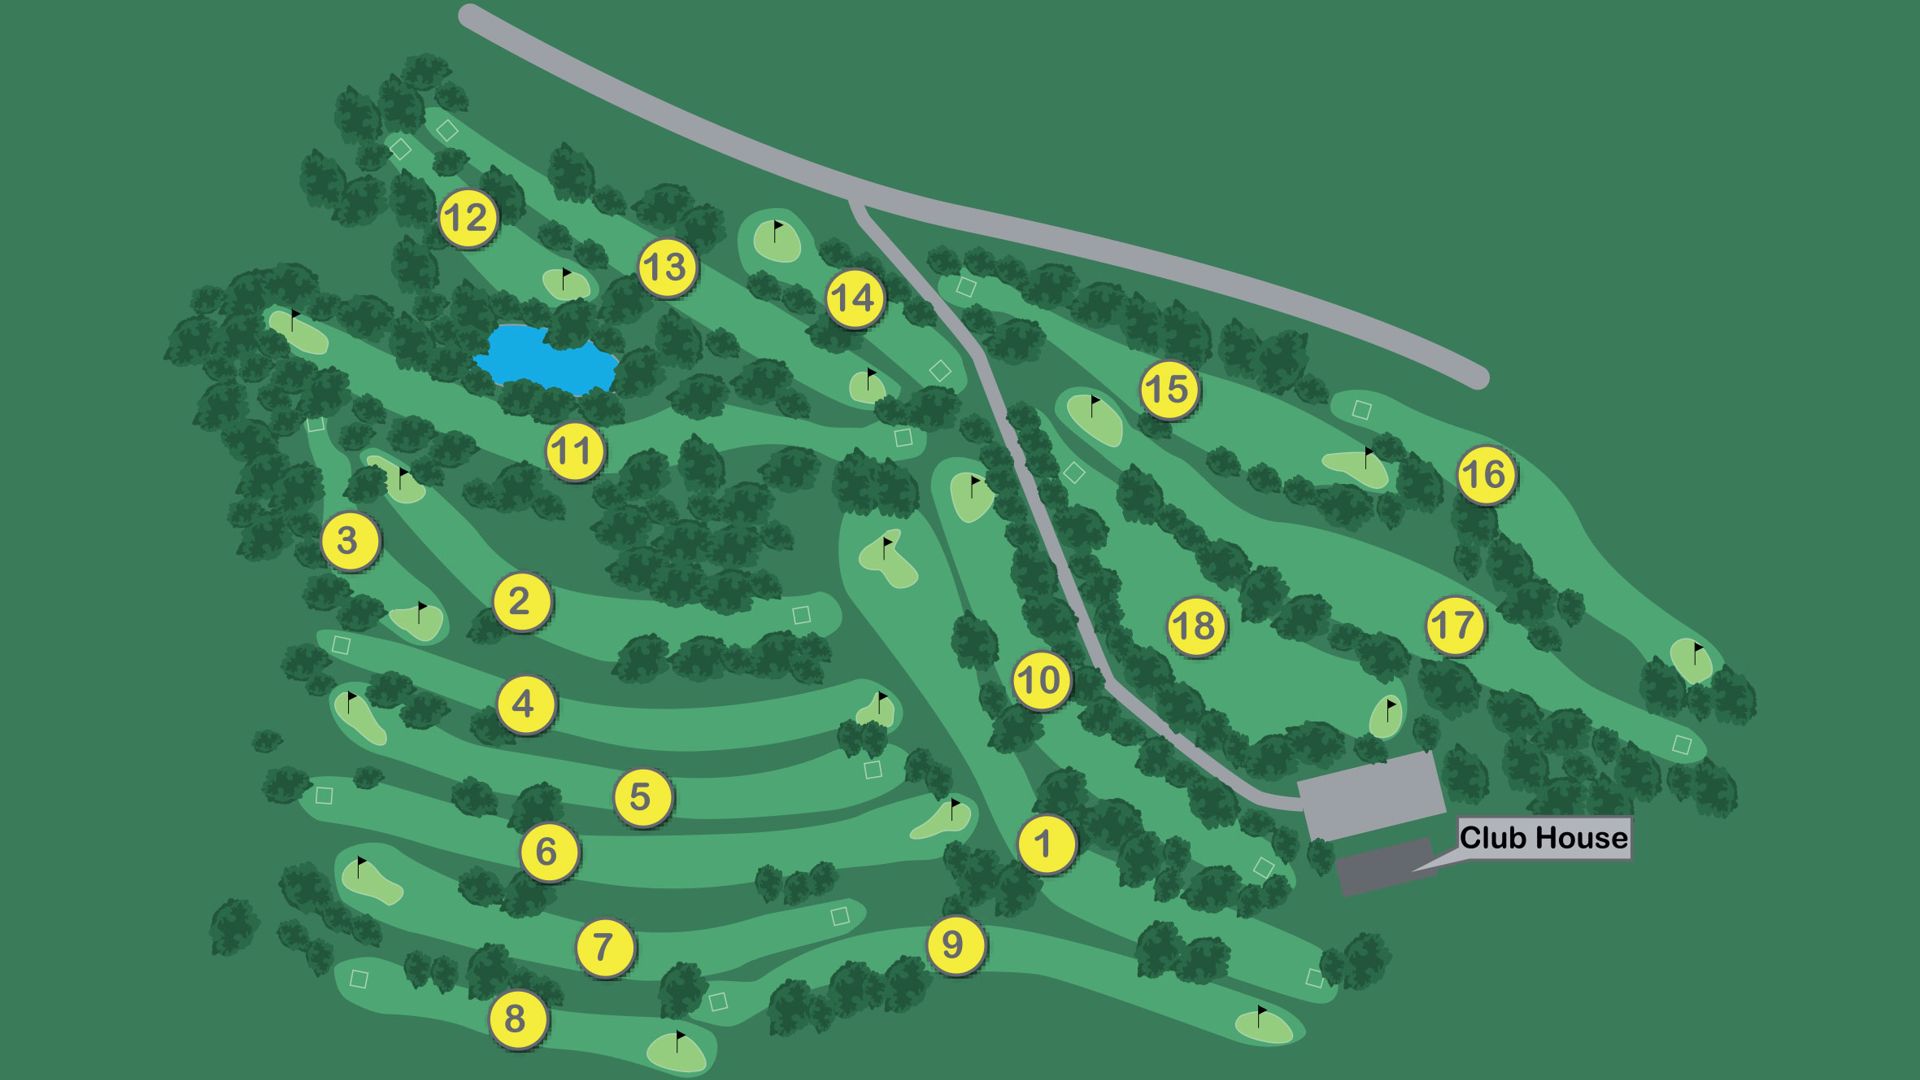 Crookhill Park Golf Course Map And Facilities